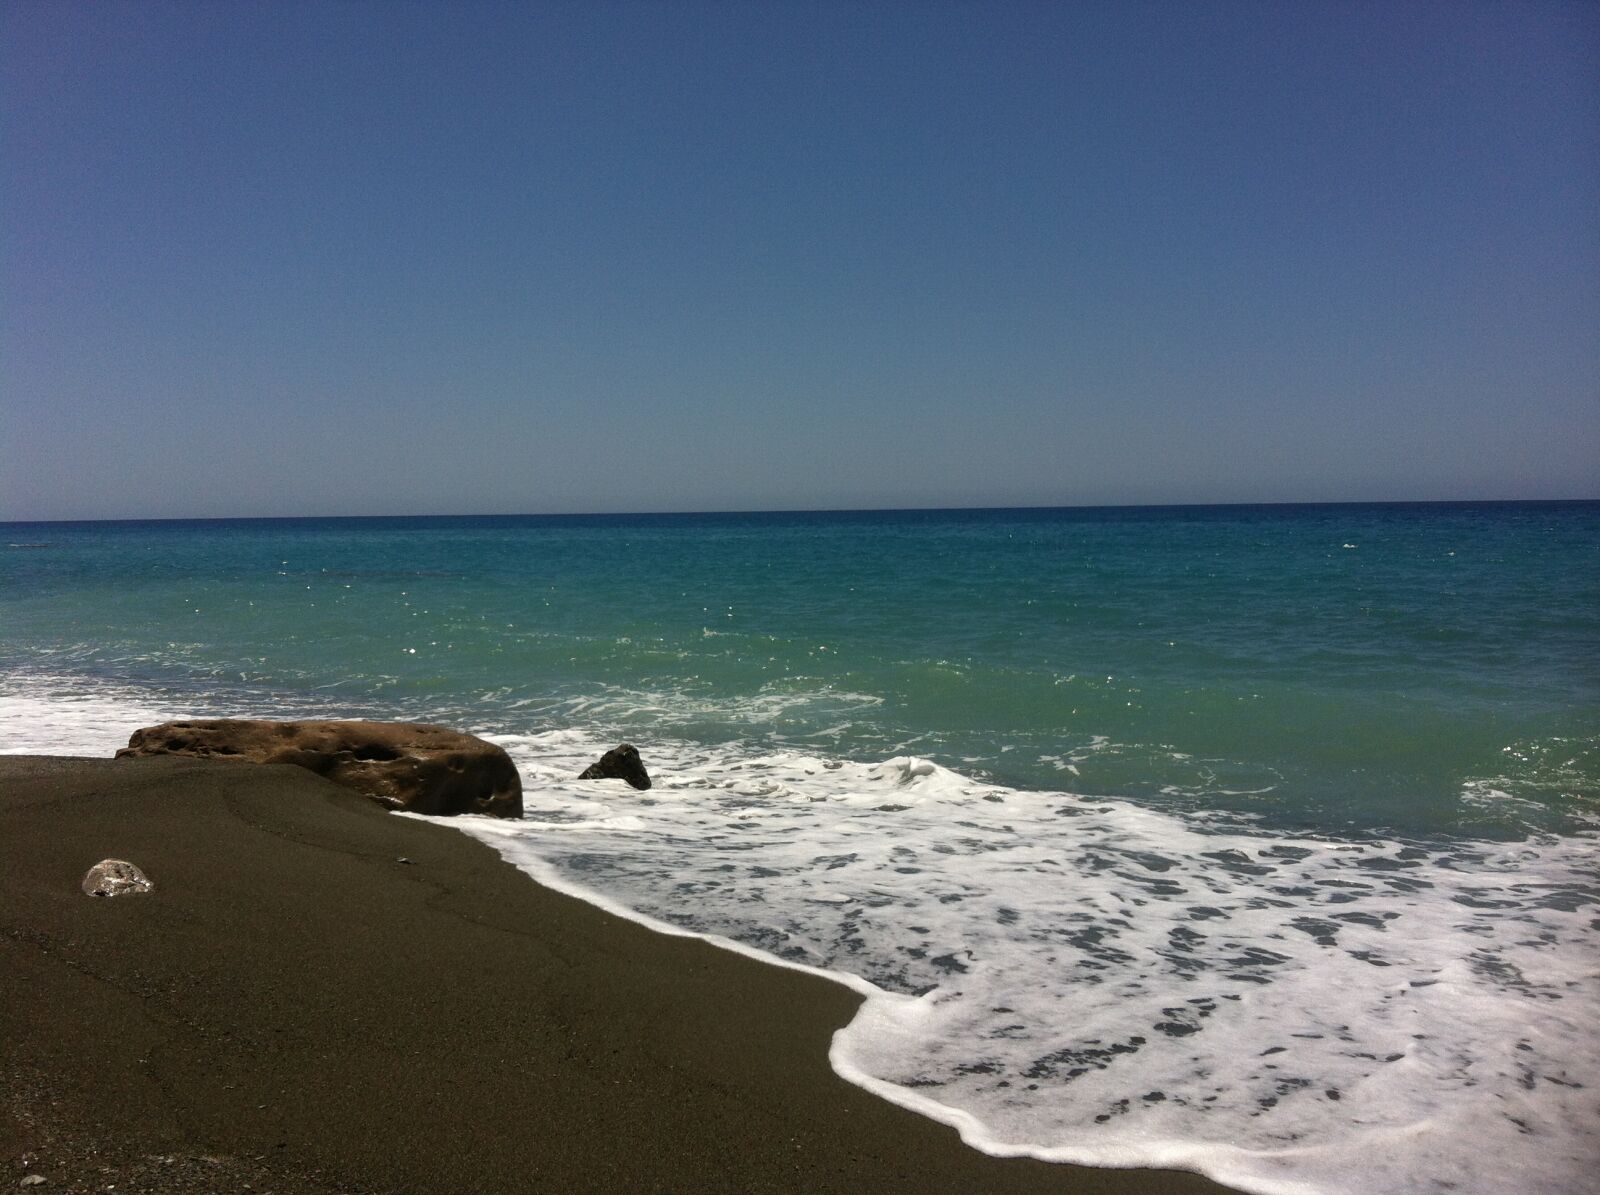 Apple iPhone 4 sample photo. Beach, blue, water, holiday photography